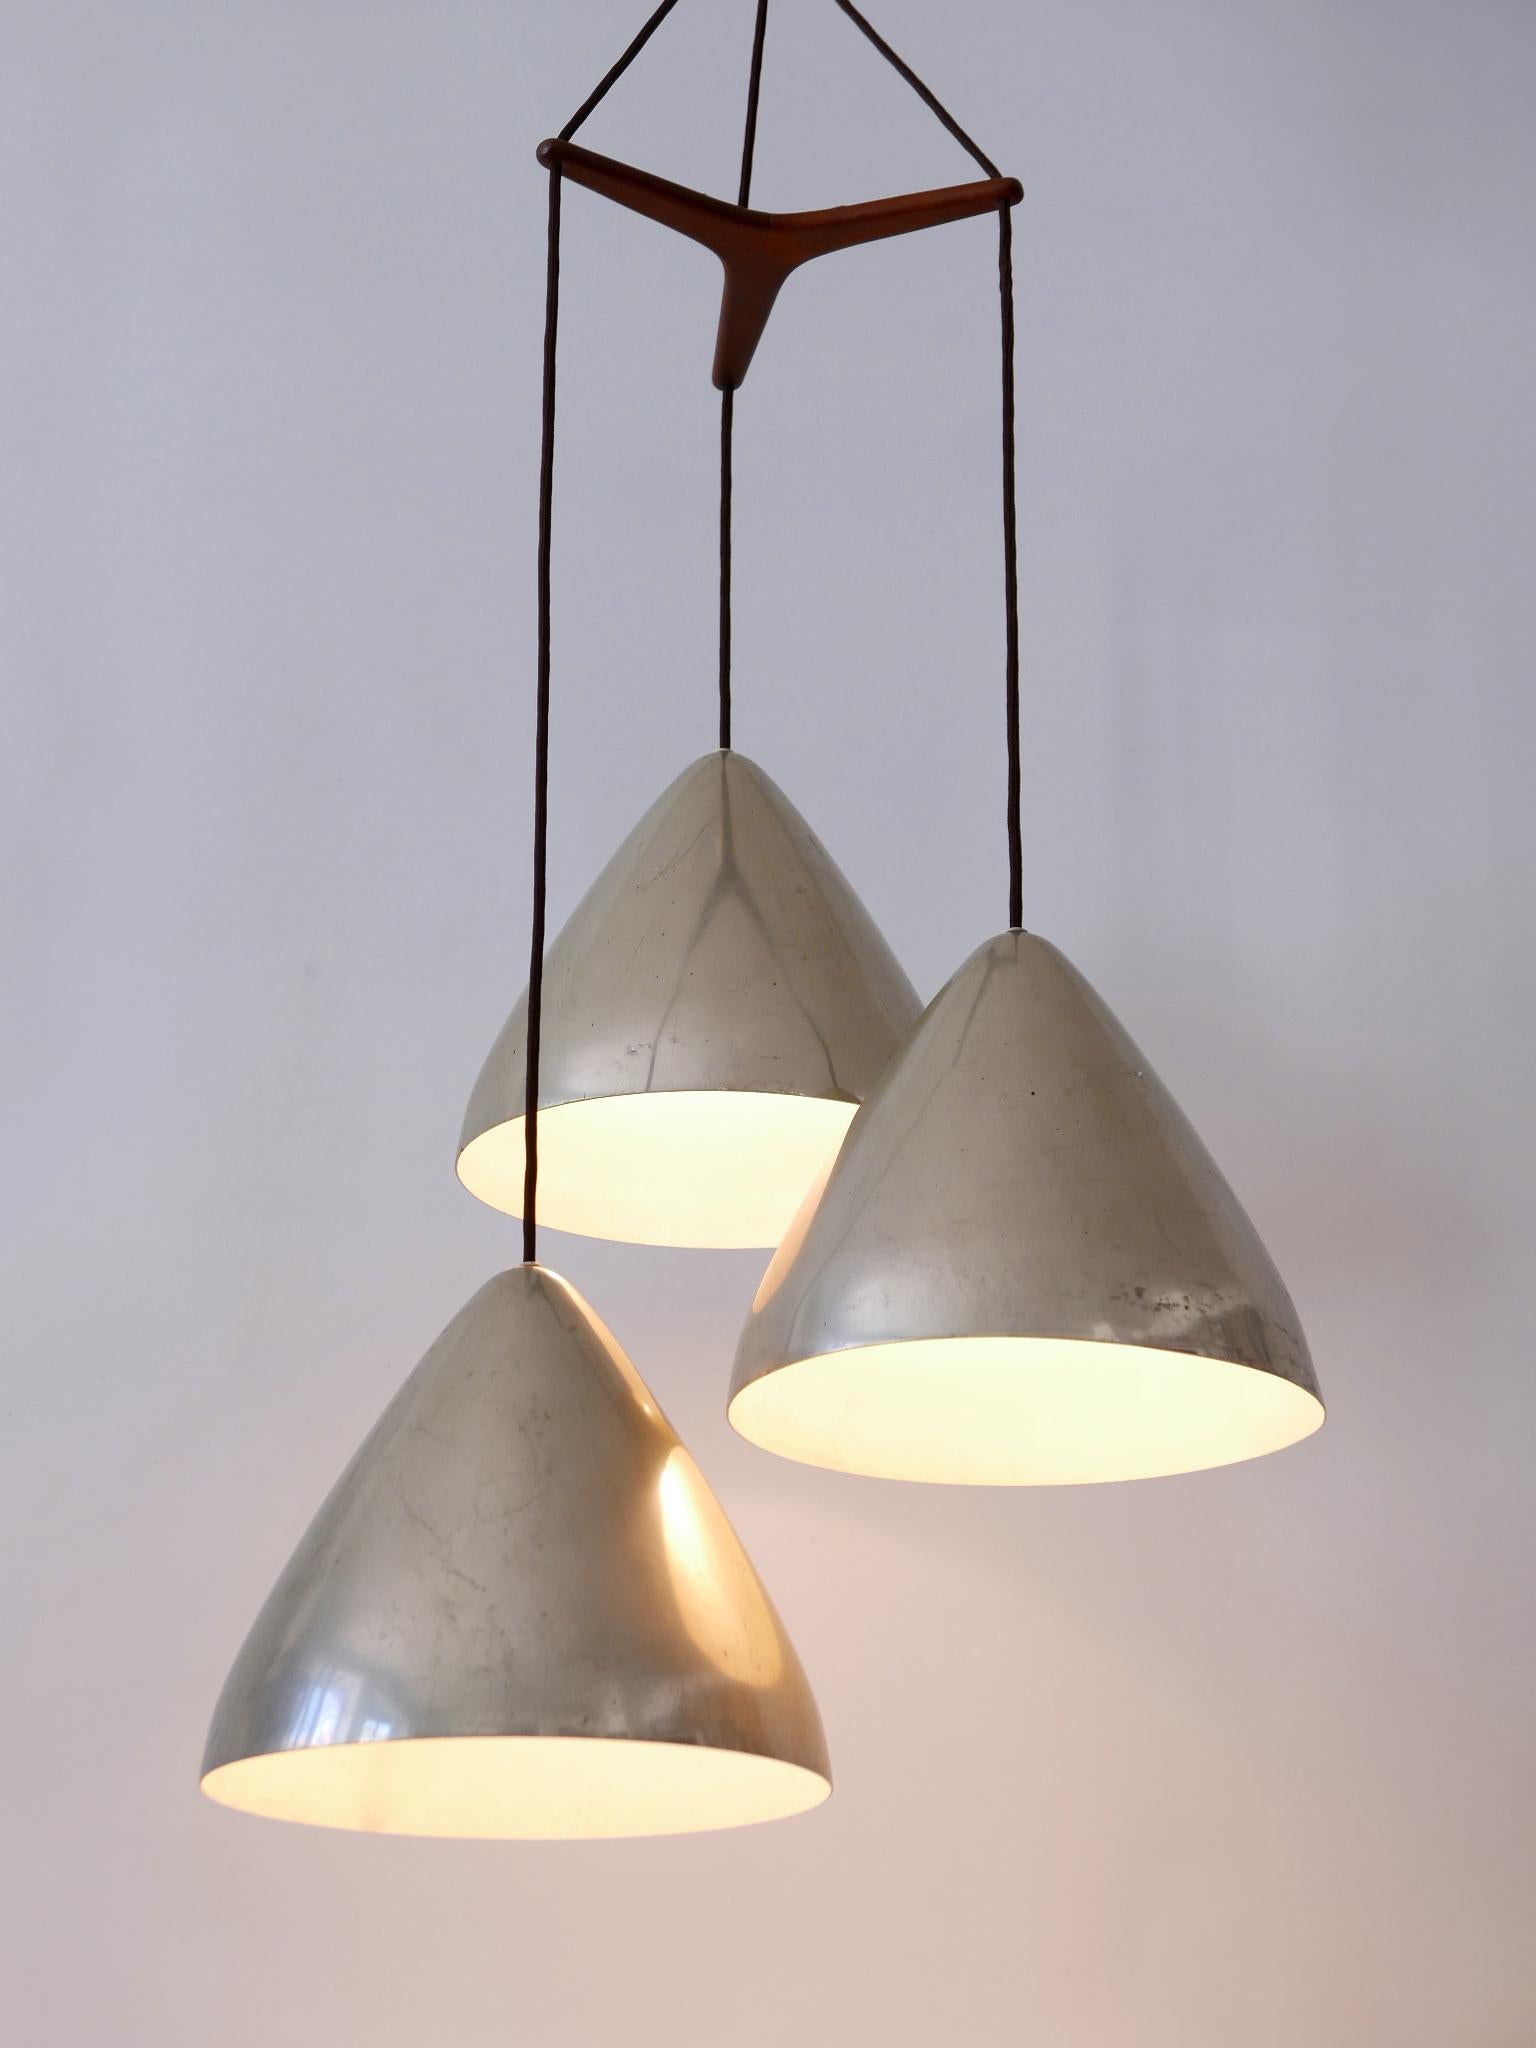 Elegant Cascading Pendant Lamp by Lisa Johansson-Pape for Orno Finland 1960s For Sale 6